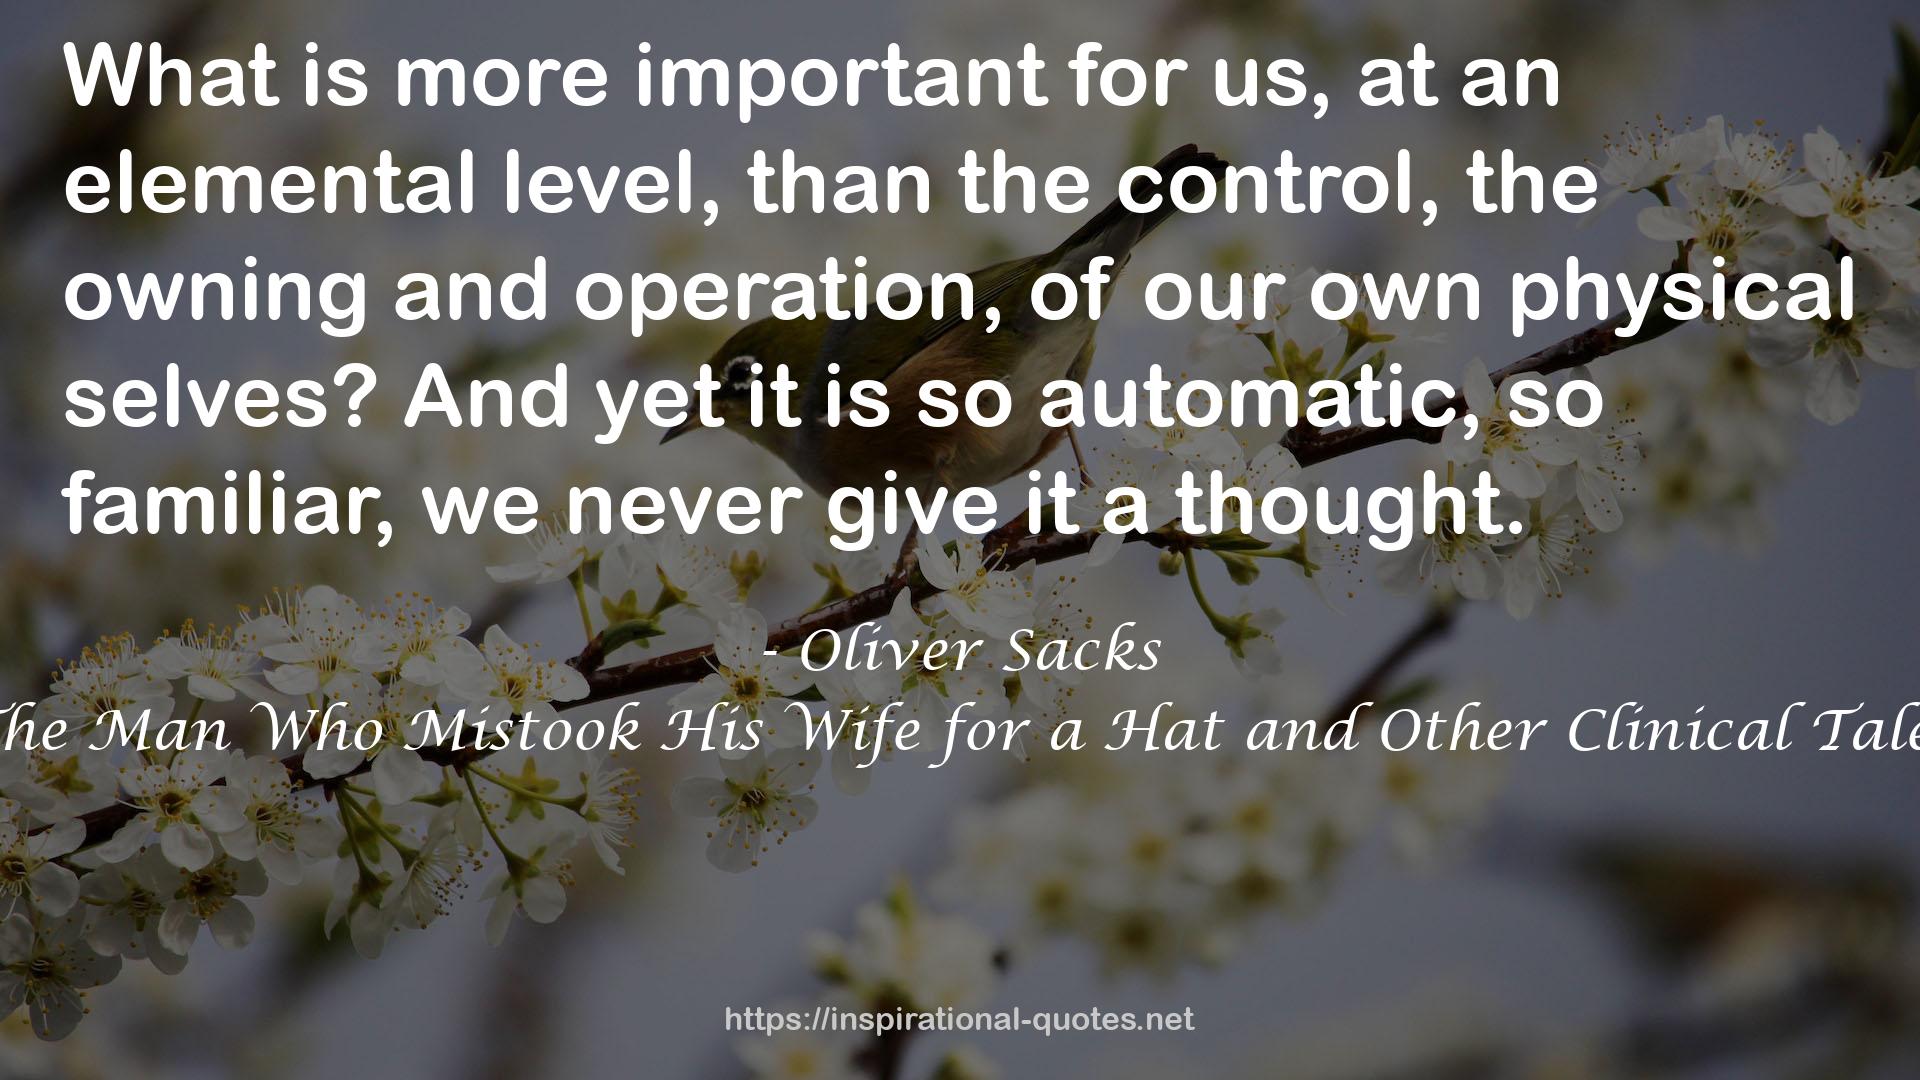 Oliver Sacks QUOTES